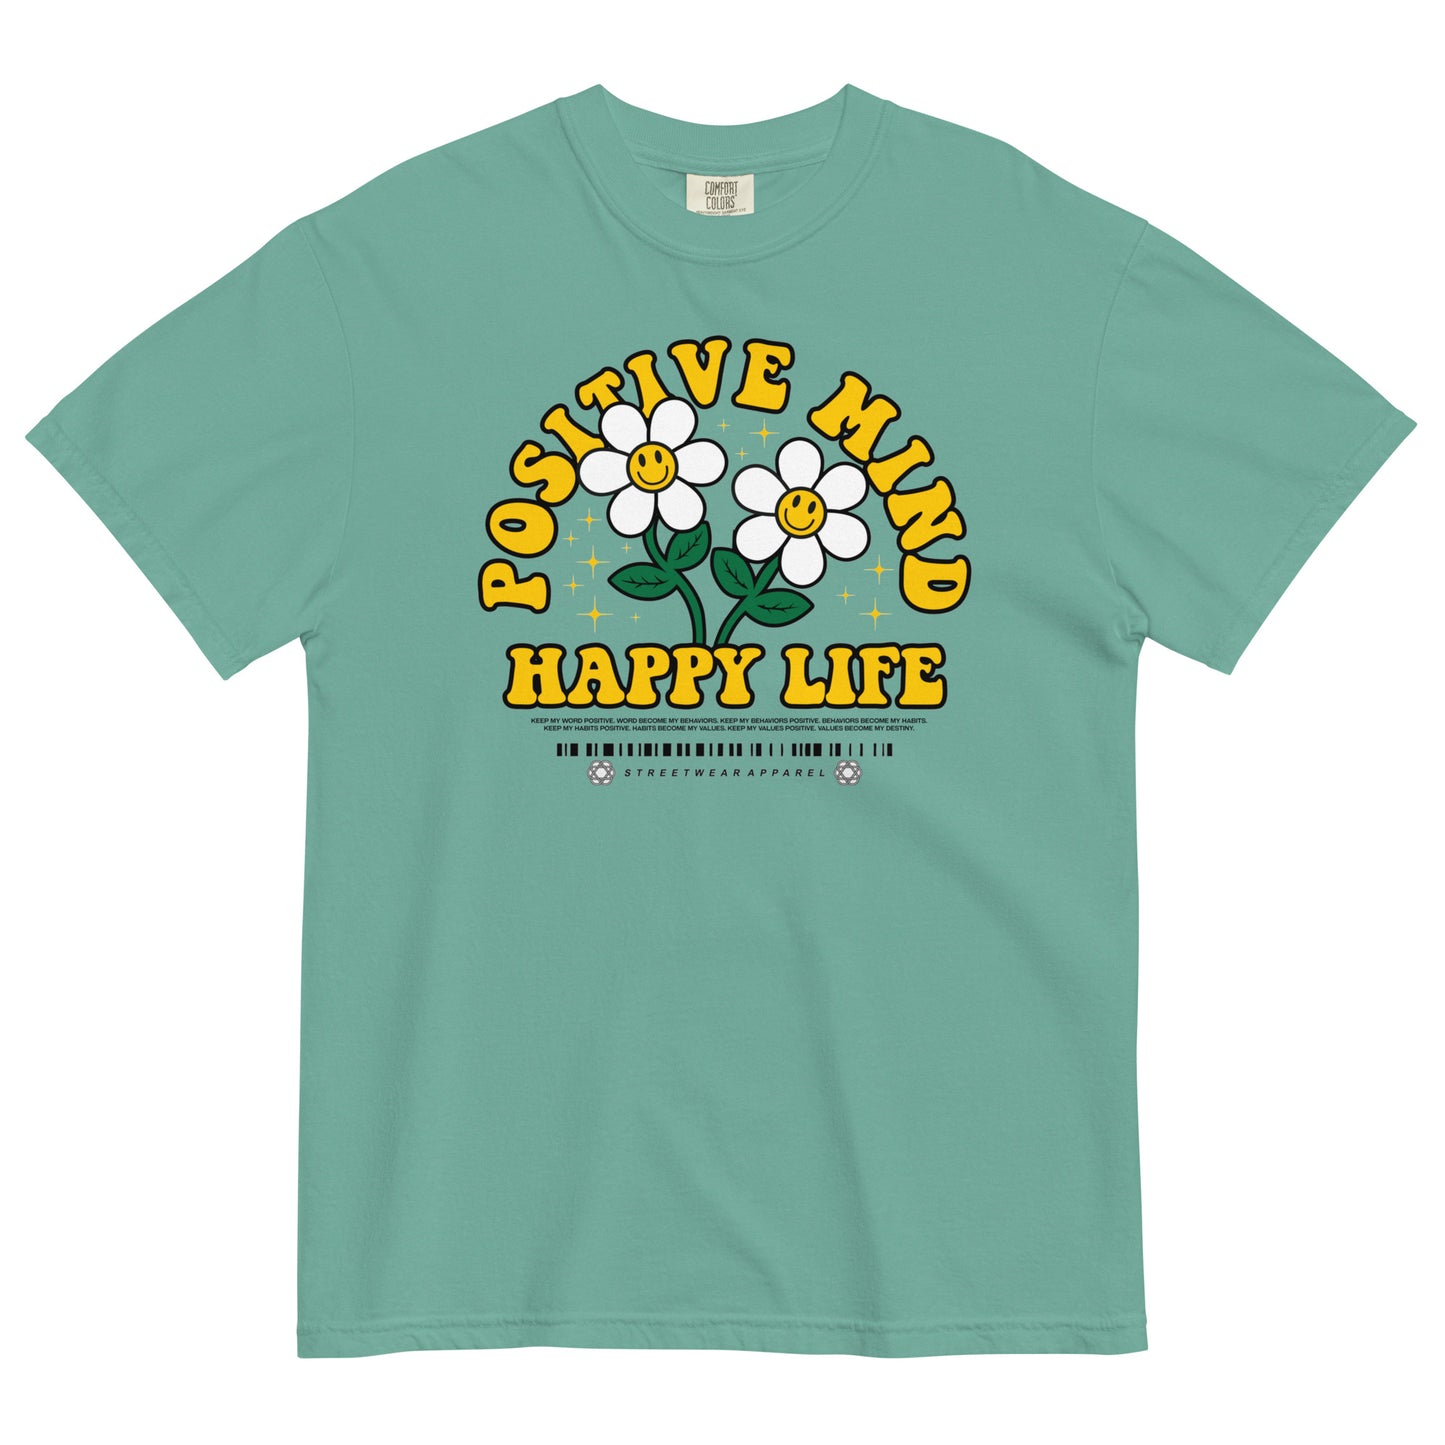 Heavyweight T-shirt with Flowers Symbol